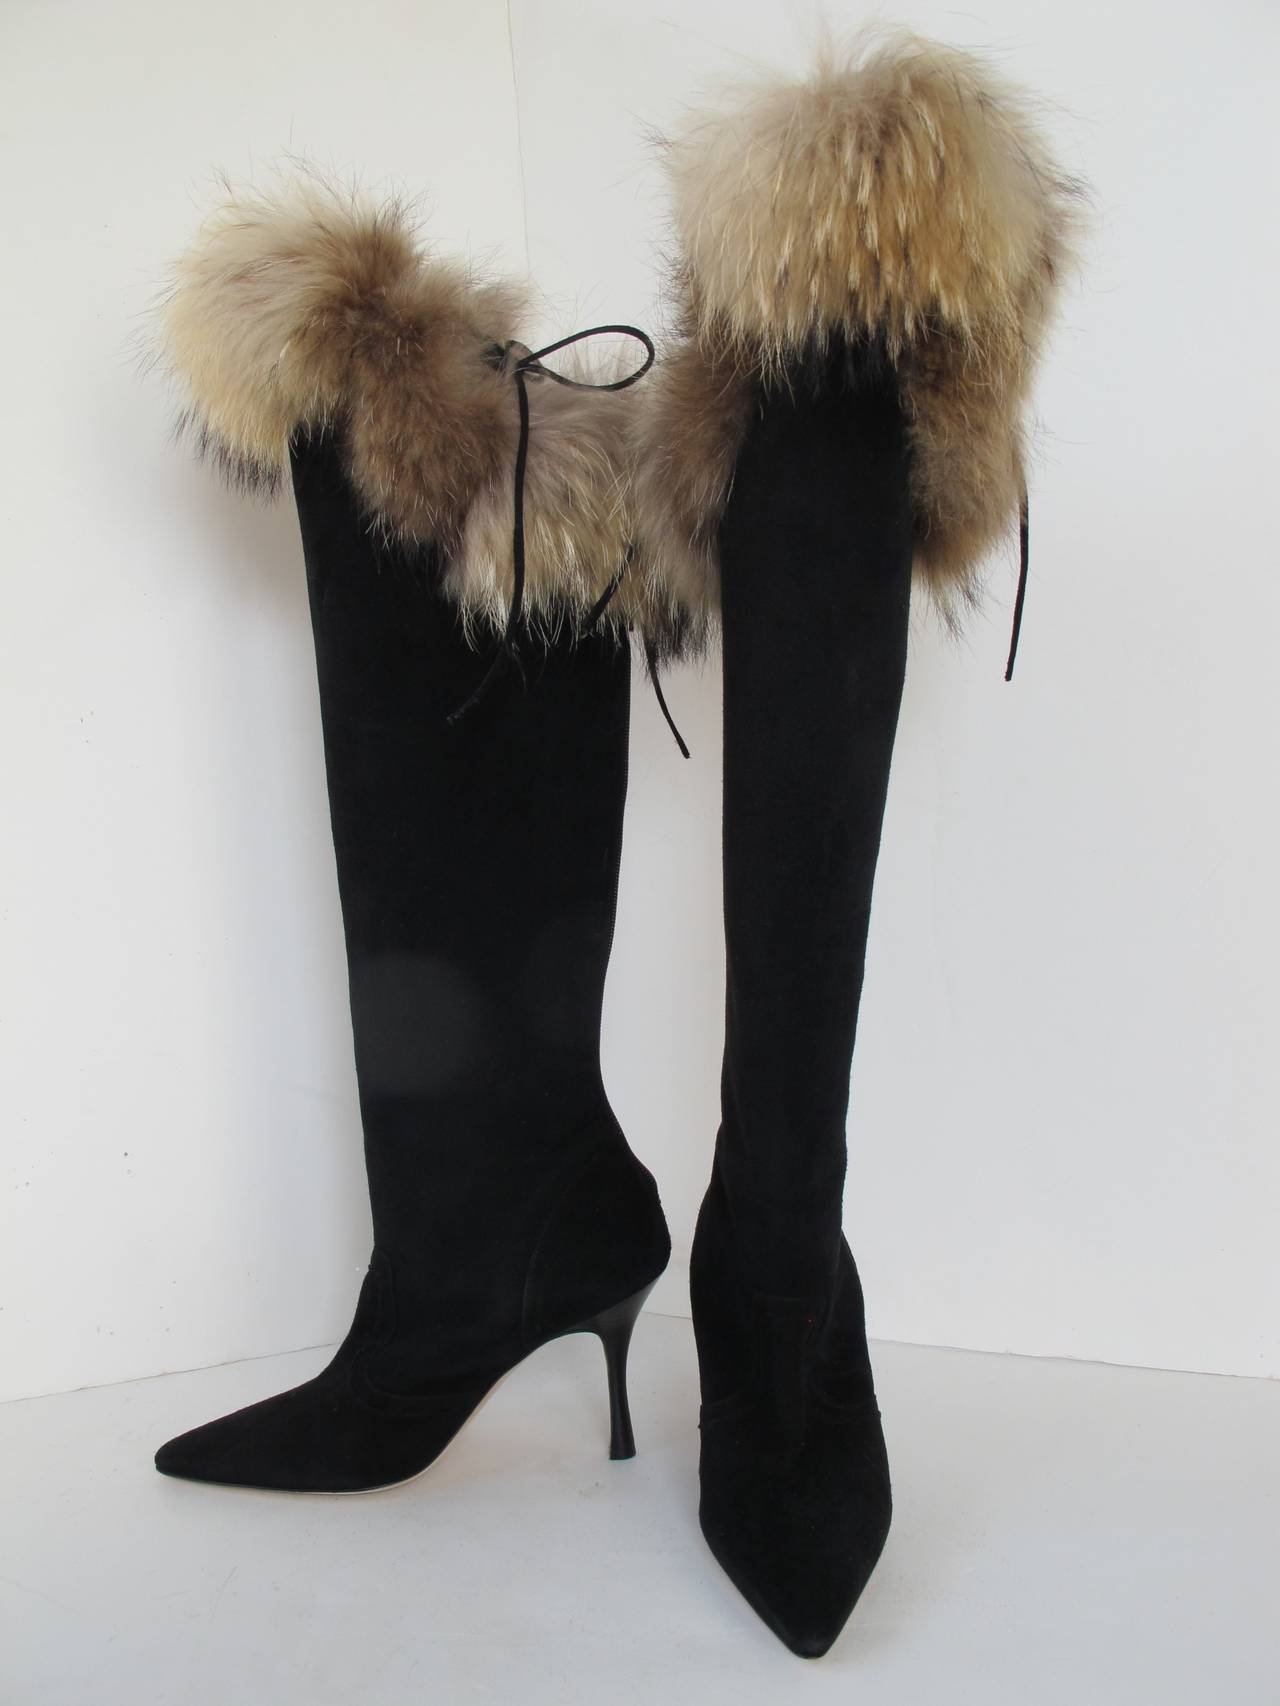 Chic Manolo Blahnik Black Suede Knee High Boots with Fox Fur Trim may be worn for day or evening wear. Heel measures 4 inches. Height of the boot measures 21 inches.